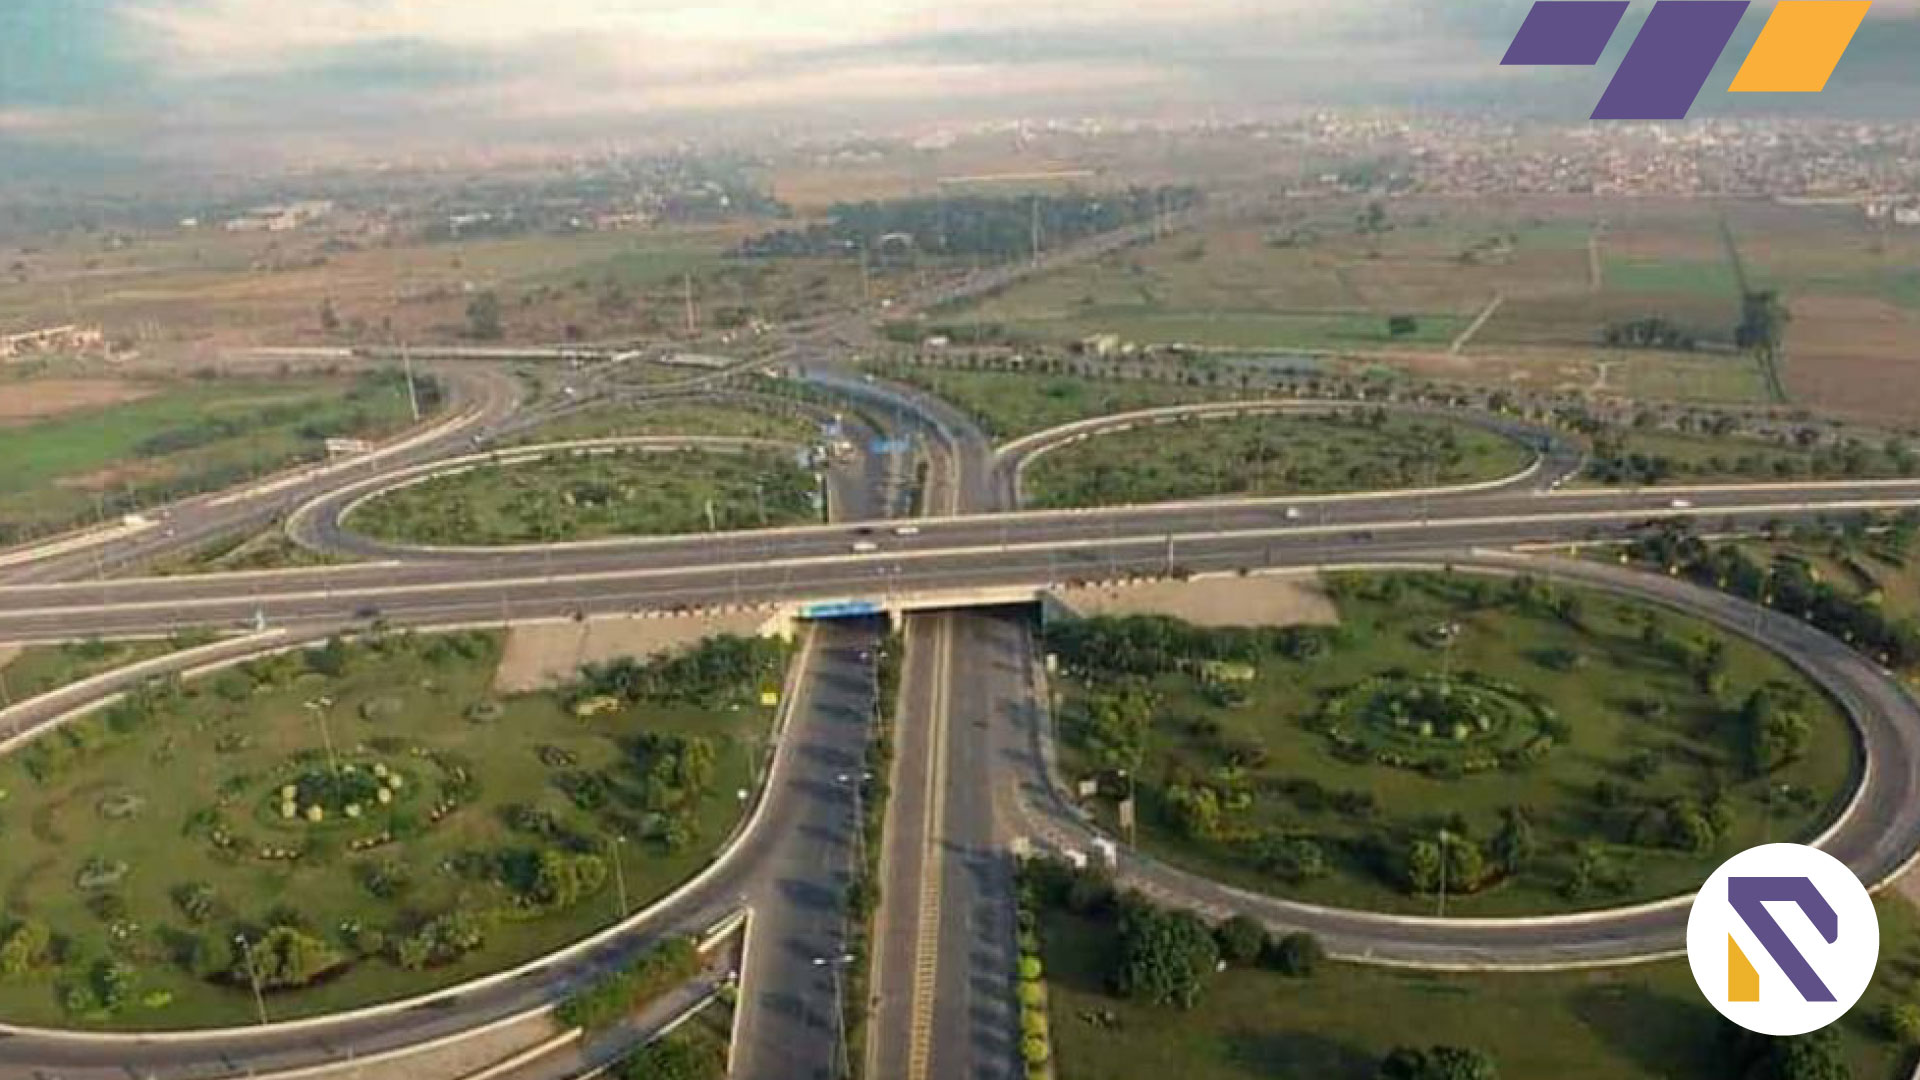 RWP Authorities are Planning to Overhaul the Kutchery Chowk Project